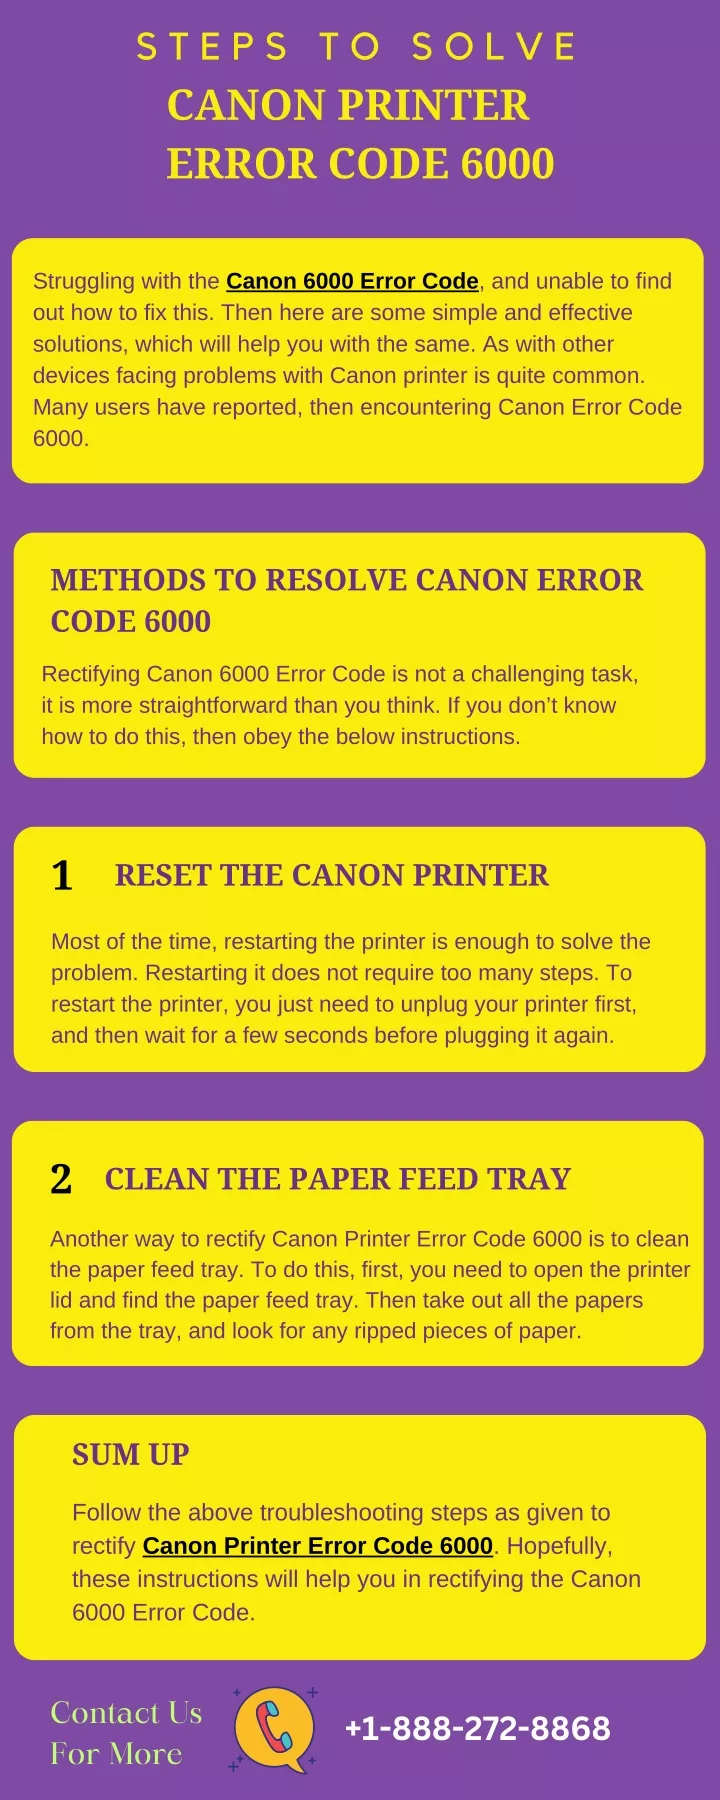 Ppt Steps To Solve Canon Printer Error 6000 Powerpoint Presentation Free Download Id12533287 1830